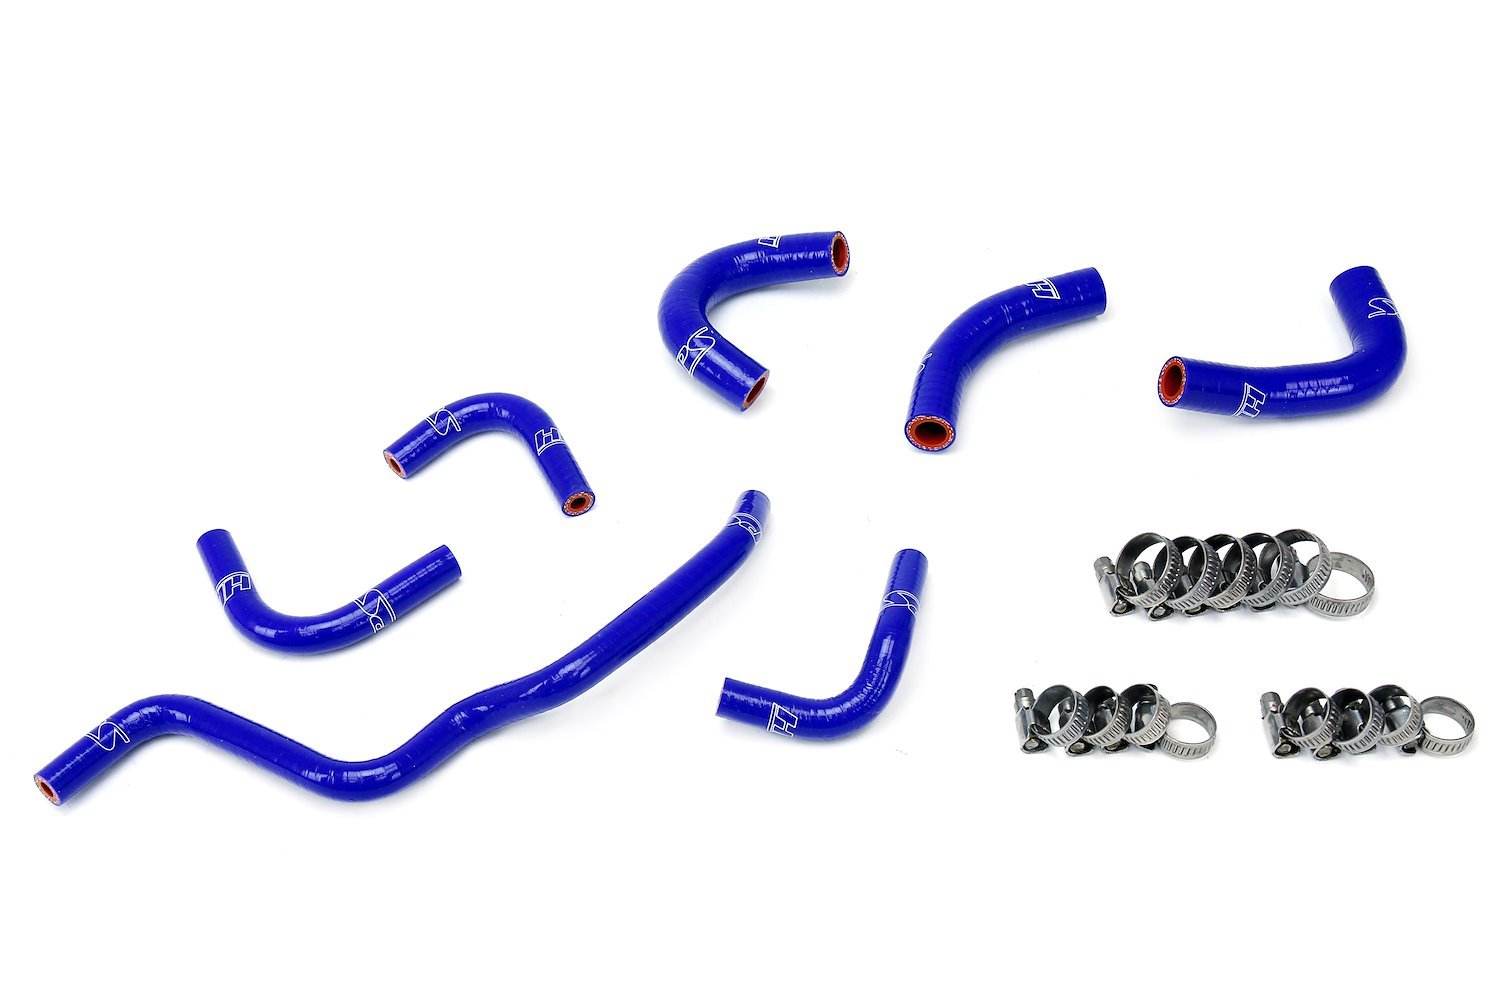 57-1857-BLUE Silicone Coolant Hose Kit, 3-Ply Reinforced Silicone, Replaces Throttle Body Coolant & Oil Cooler Hoses